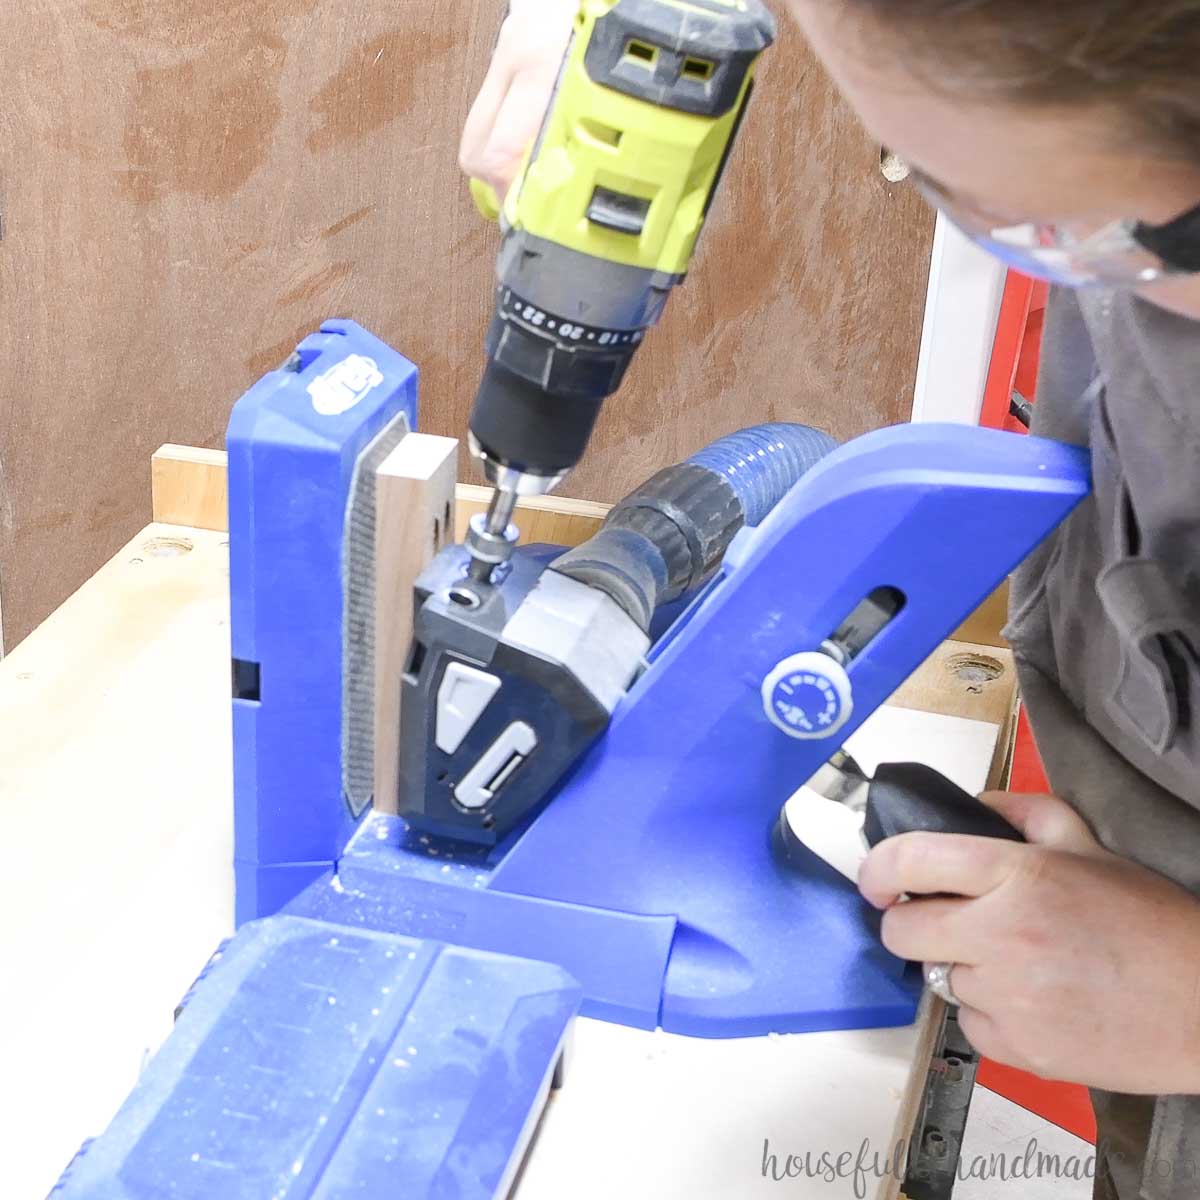 Drilling pocket holes in the ends of a 1x2 board. 